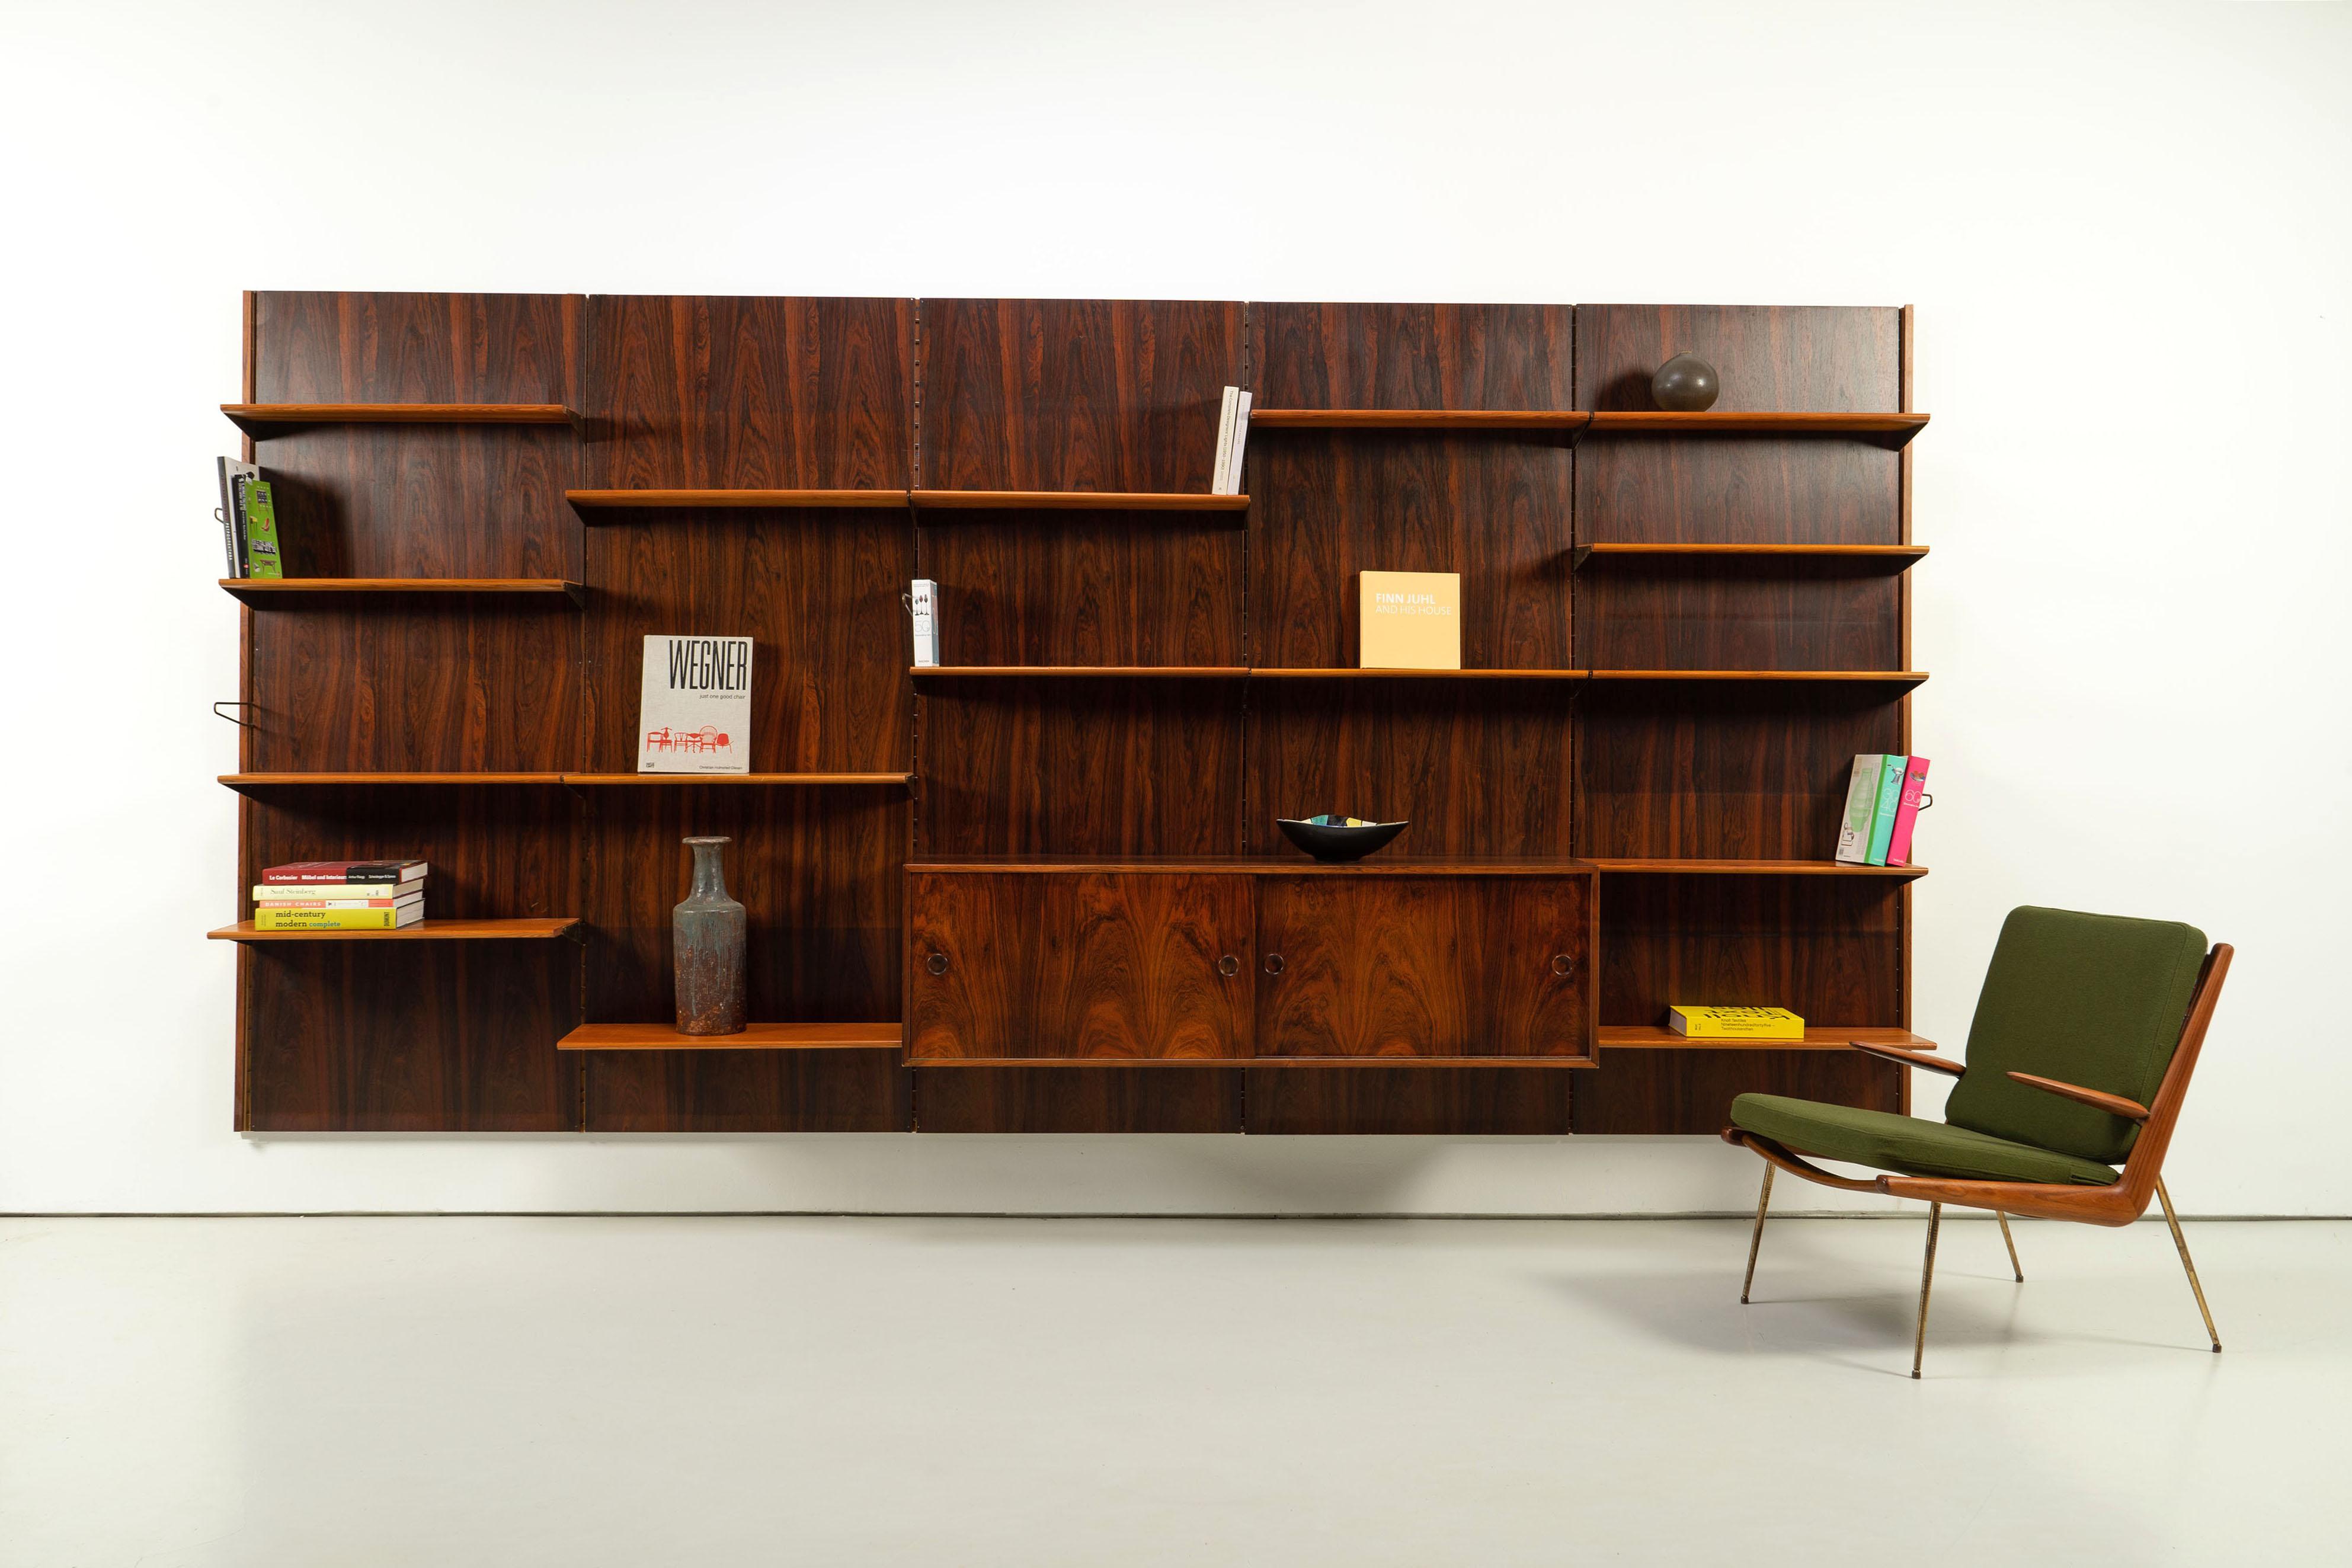 Large modular wall shelf BO71 from the 1960s with a beautiful rosewood veneer and shelves made of pine and brass, designed by Finn Juhl in 1953. The placement of the shelves and sideboard can be freely chosen. The shelf was manufactured by Bovirke